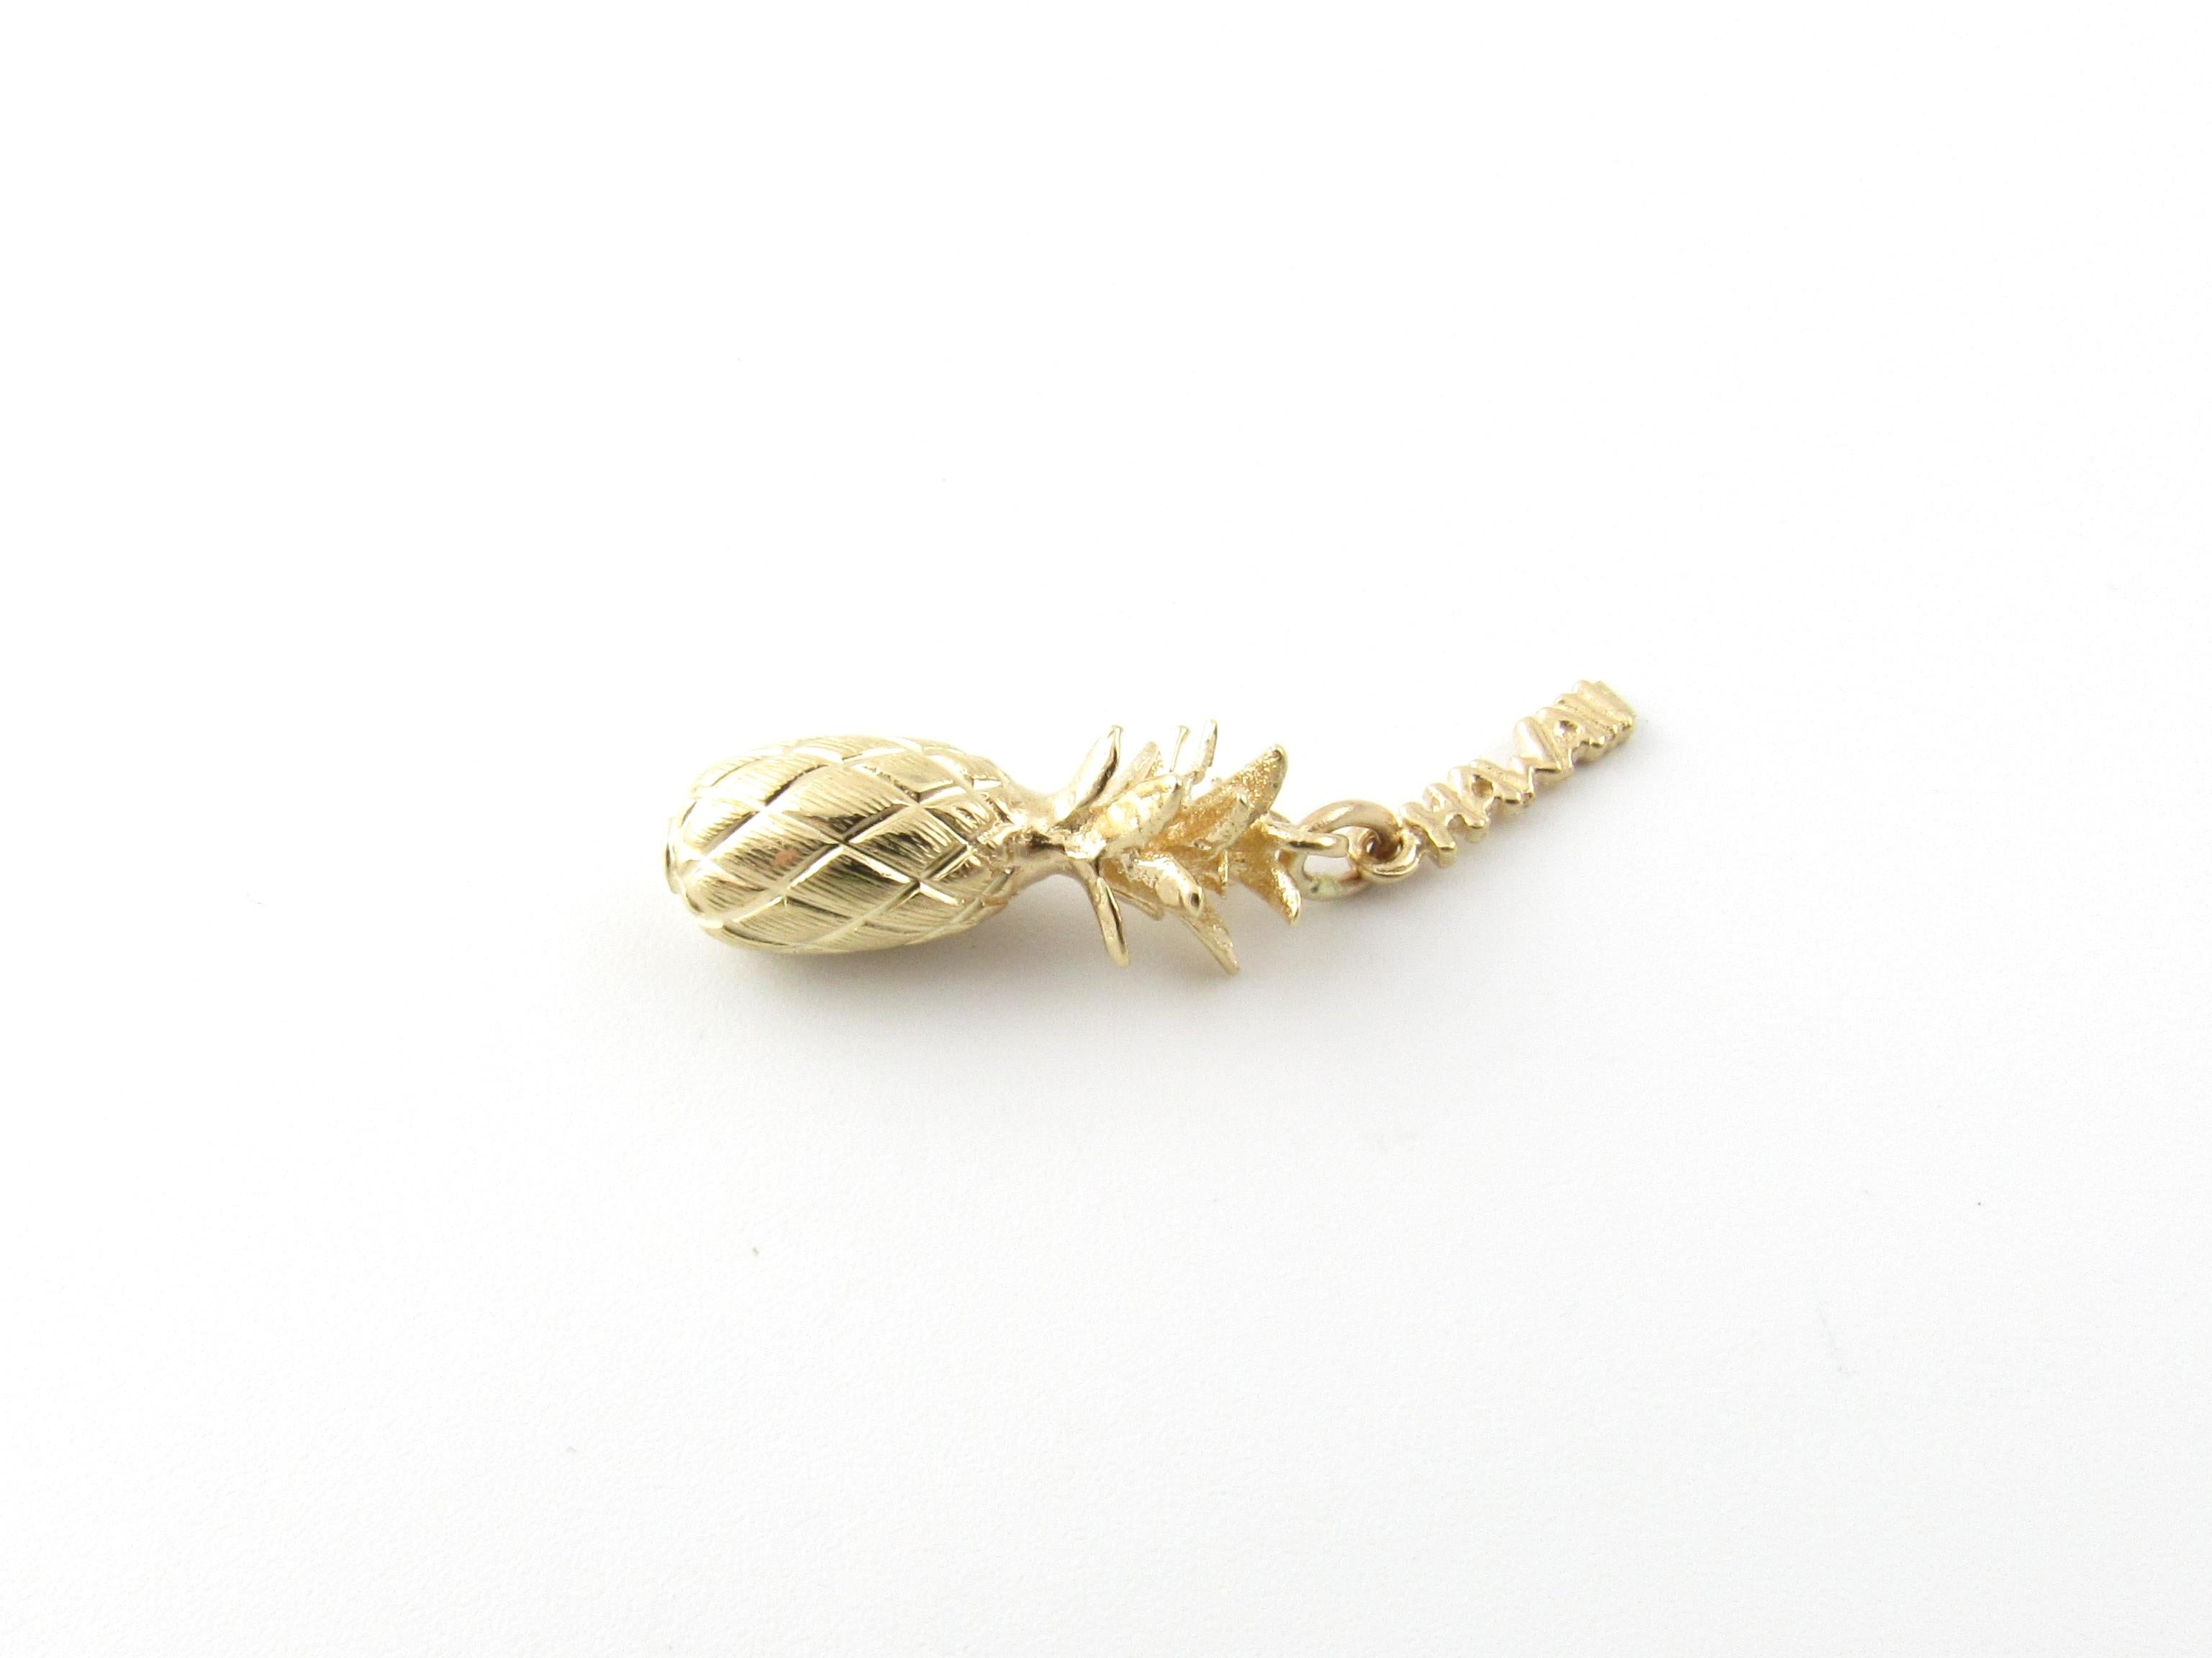 Vintage 14 Karat Yellow Gold Hawaii Pineapple Charm

Perfect addition to your travel charm collection!

This lovely charm features a miniature pineapple and a 